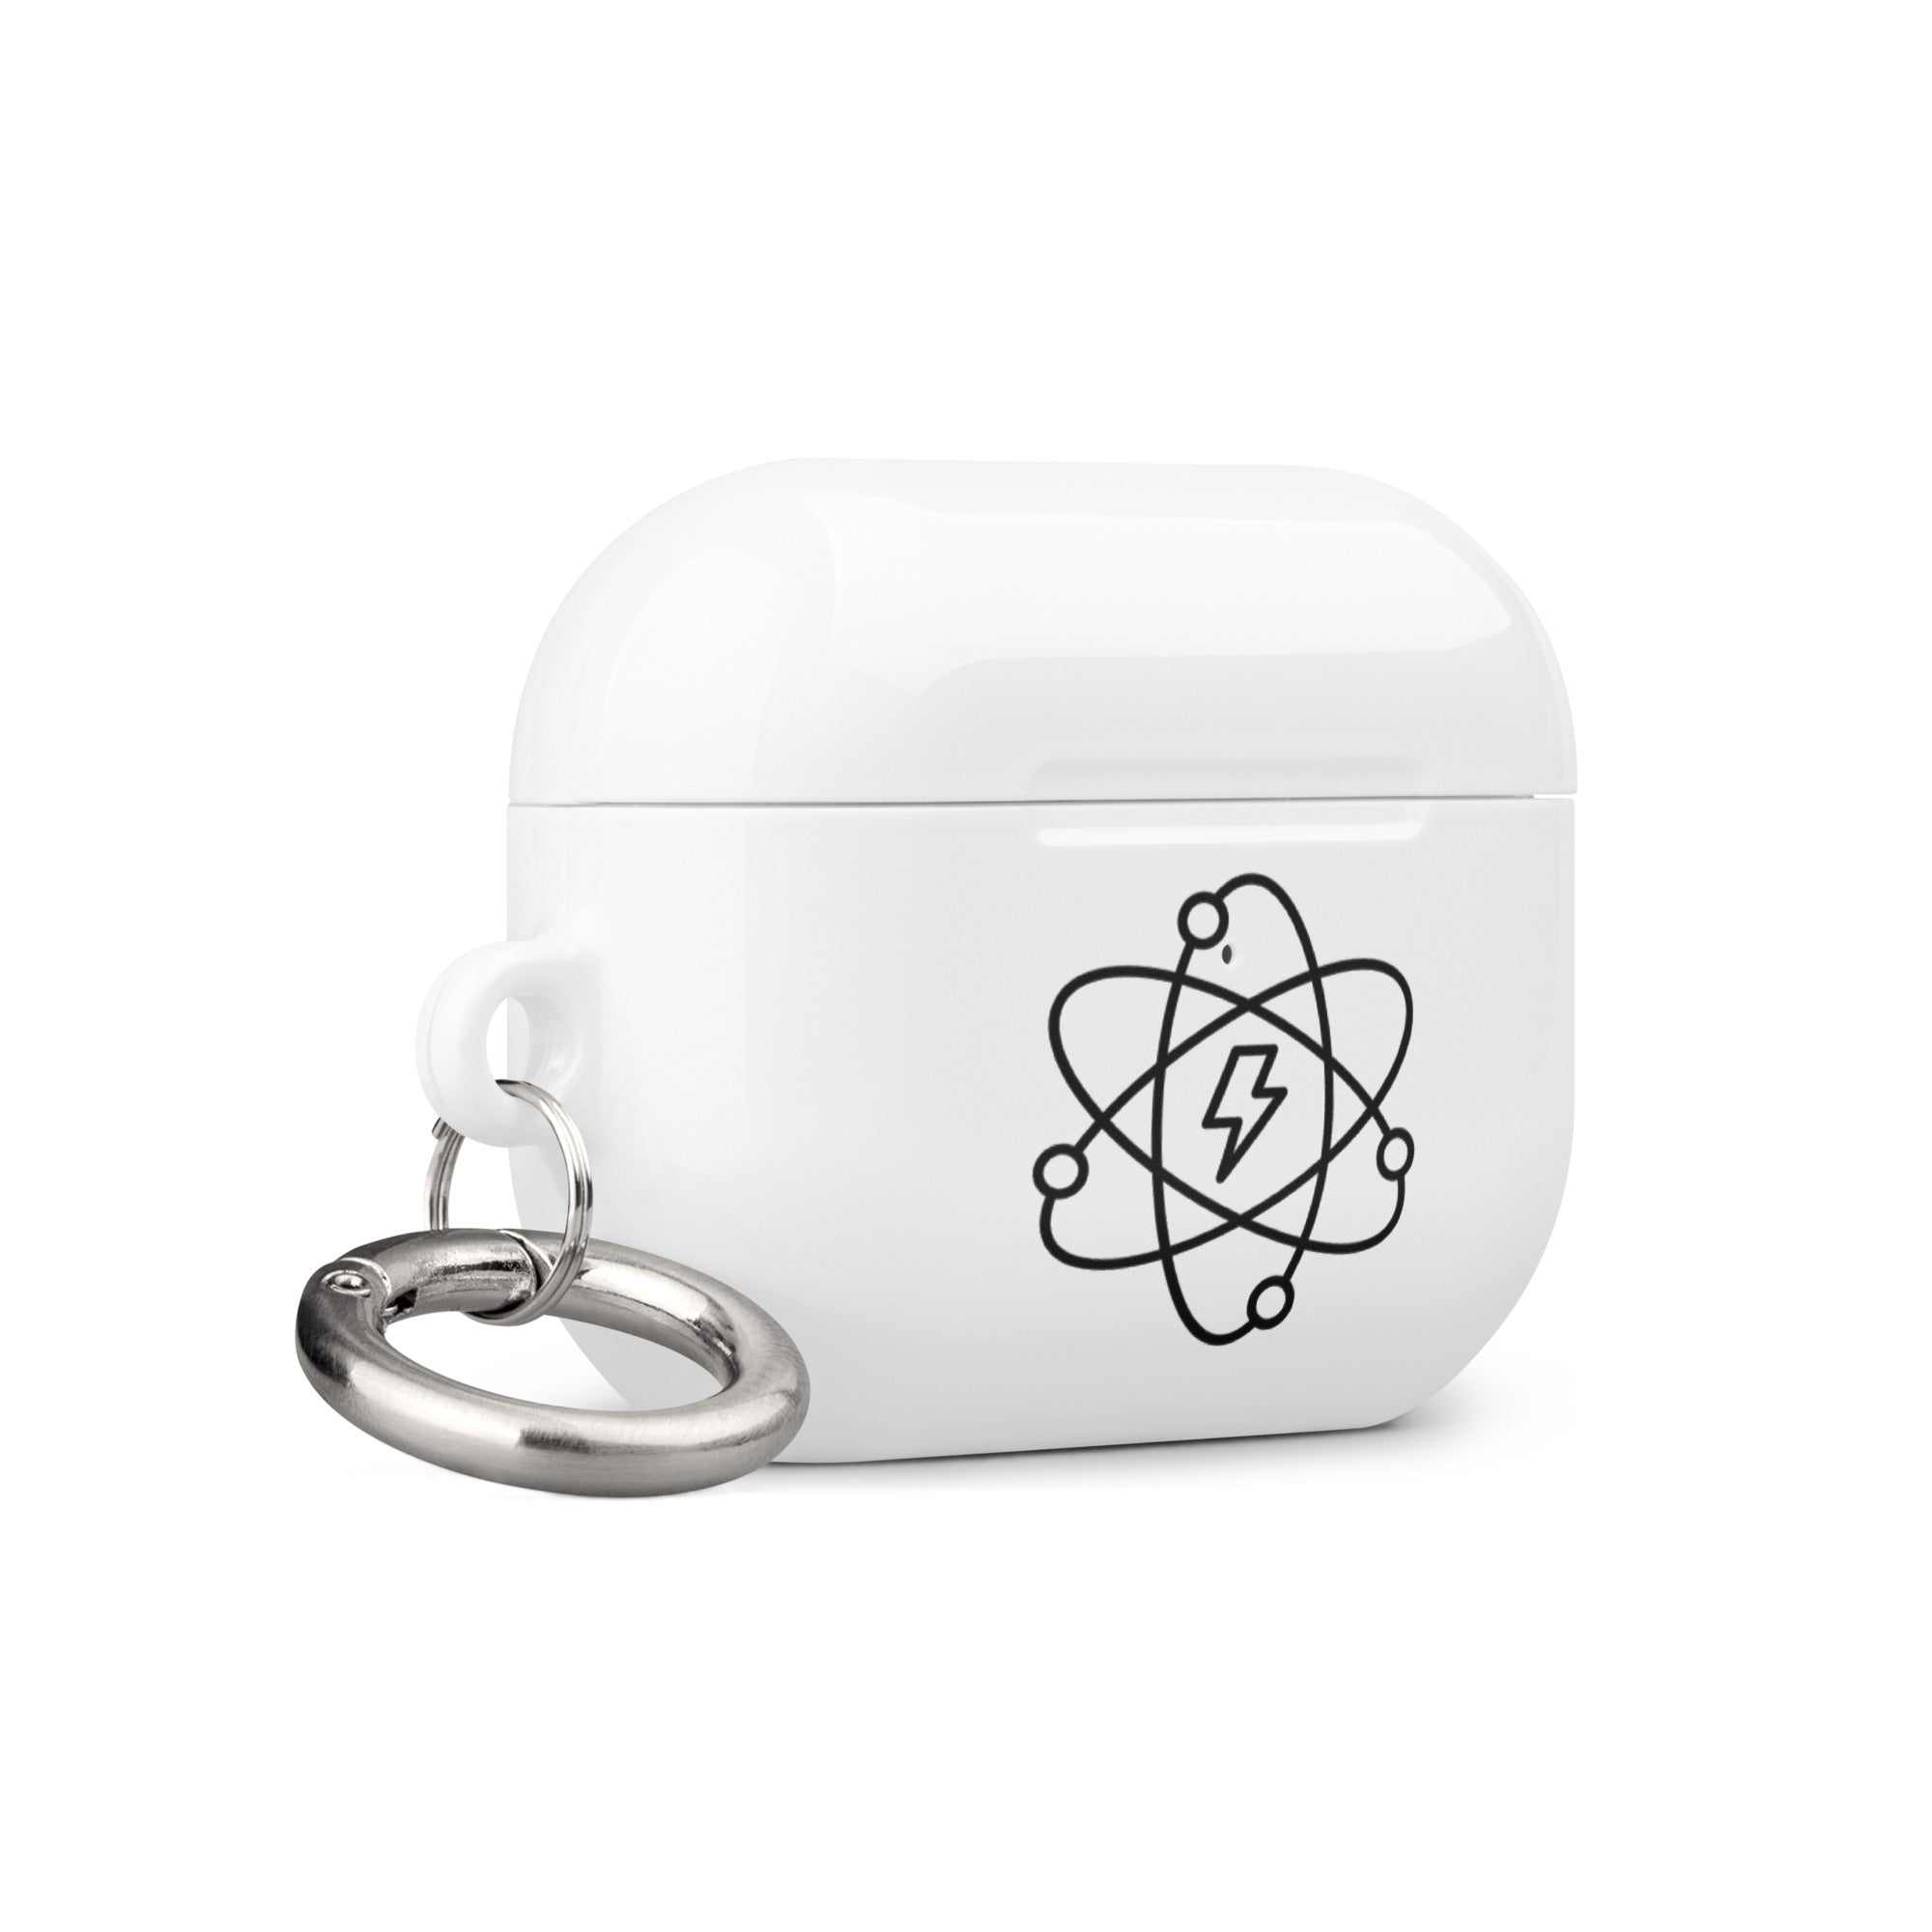 Left View of White Atomical AirPod Pro Gen 2 Hard Plastic case, with atomic energy logo, with key chain and clip.